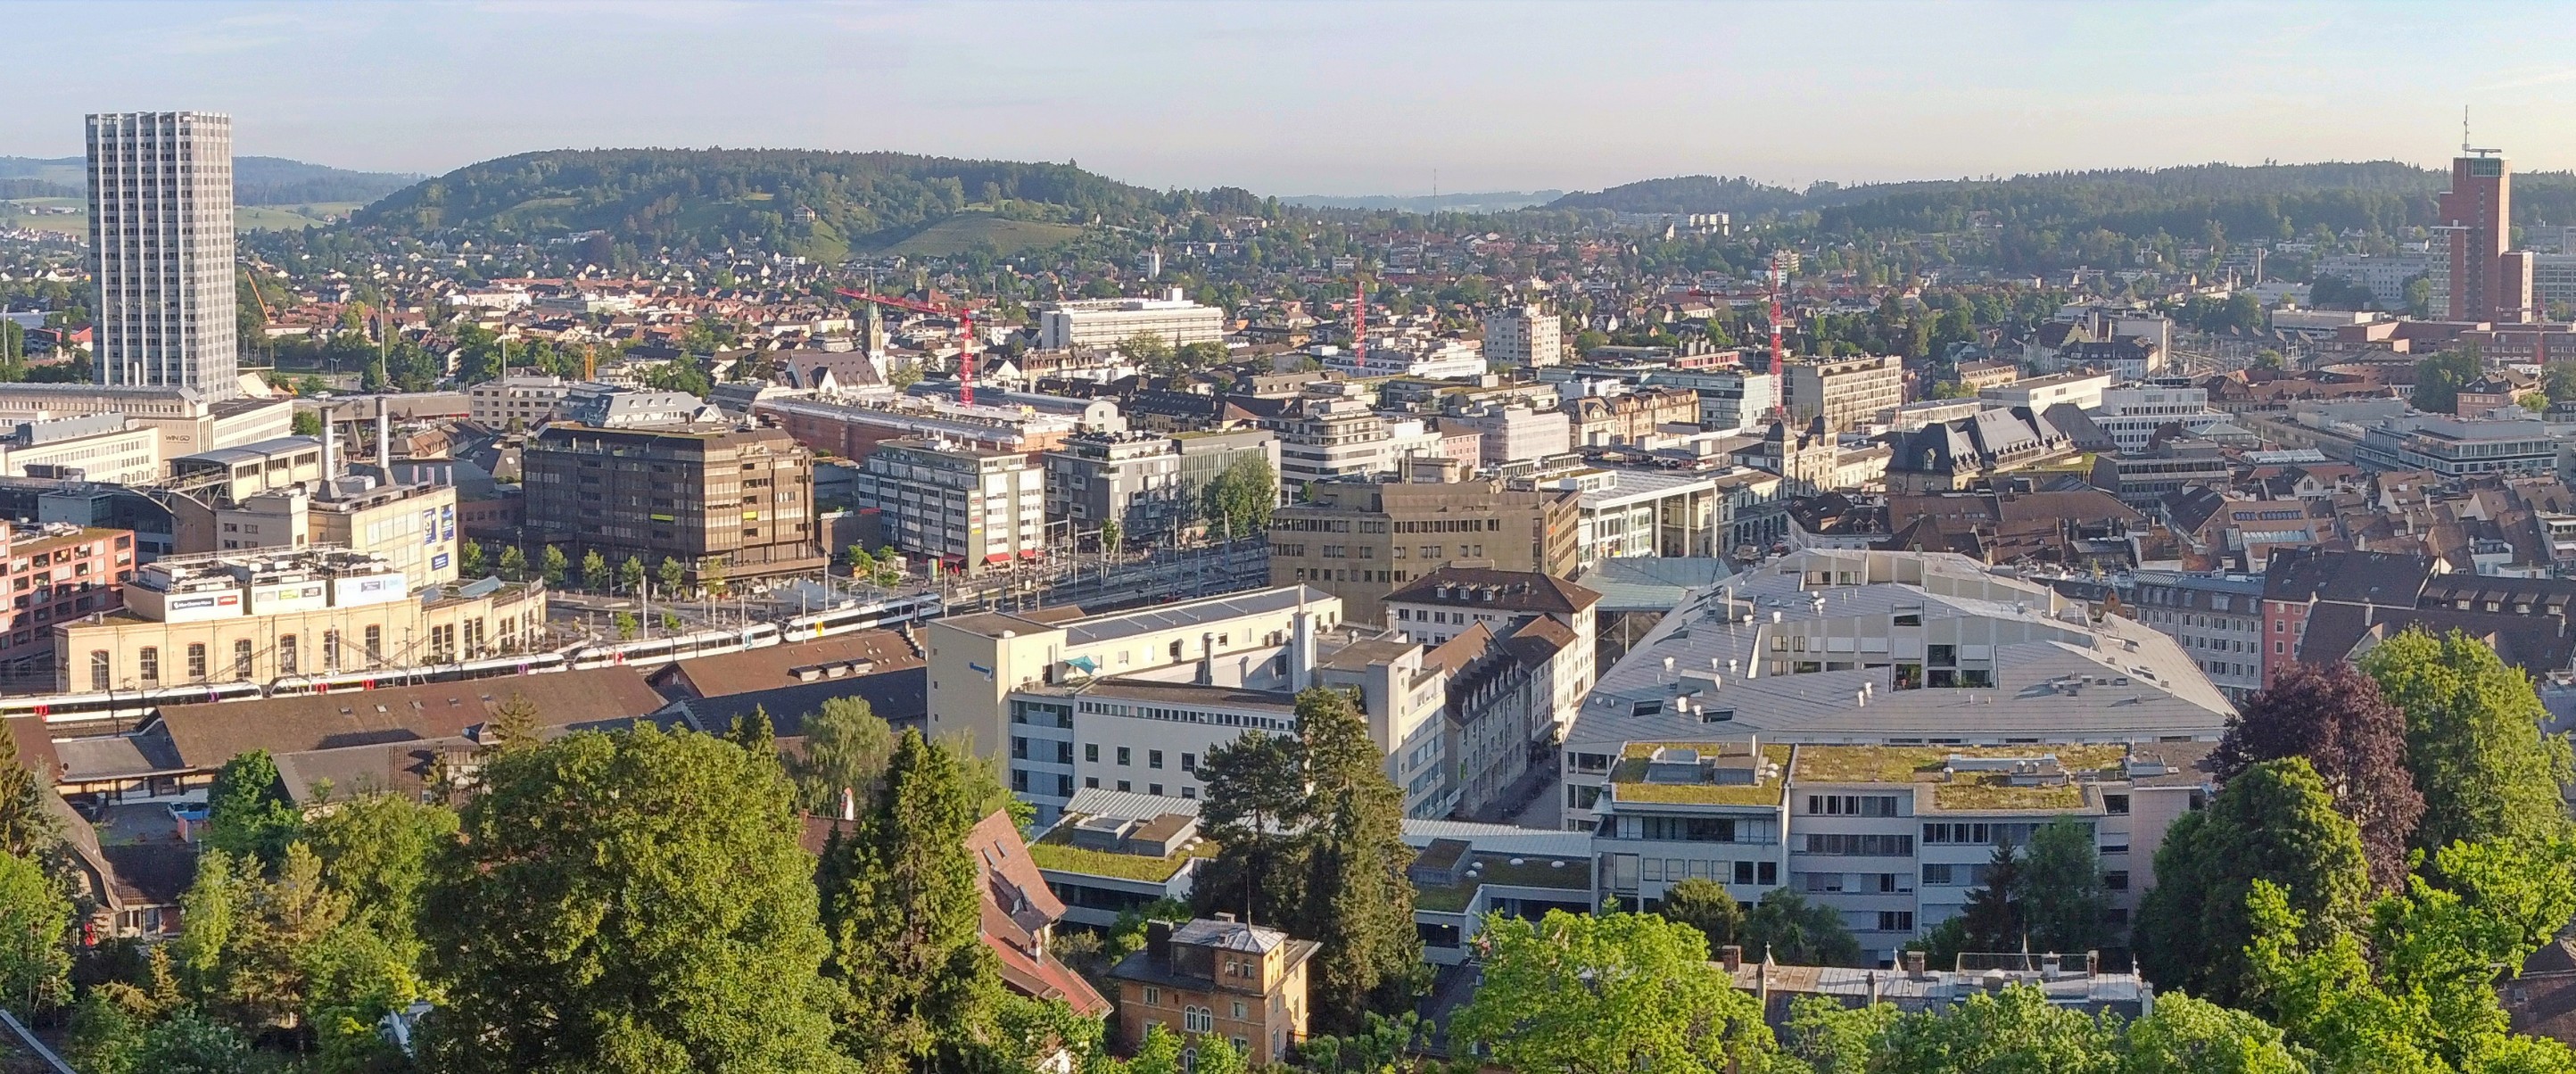 The location of Vontobel in the city Winterthur - Panorama over the city of Winterthur